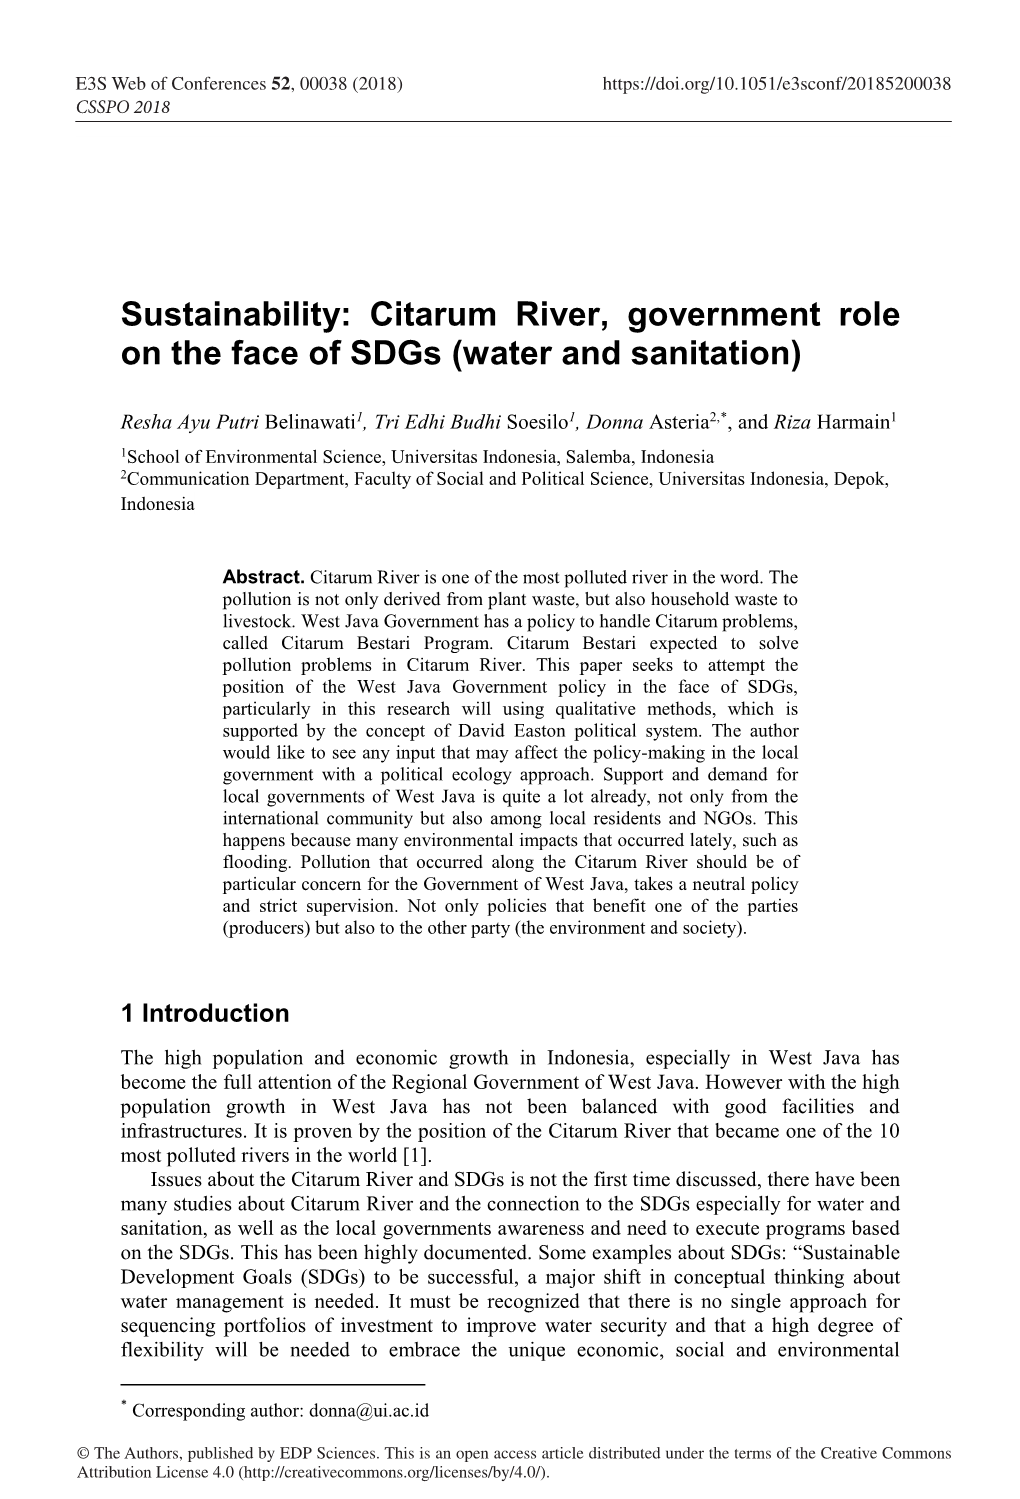 Citarum River, Government Role on the Face of Sdgs (Water and Sanitation)